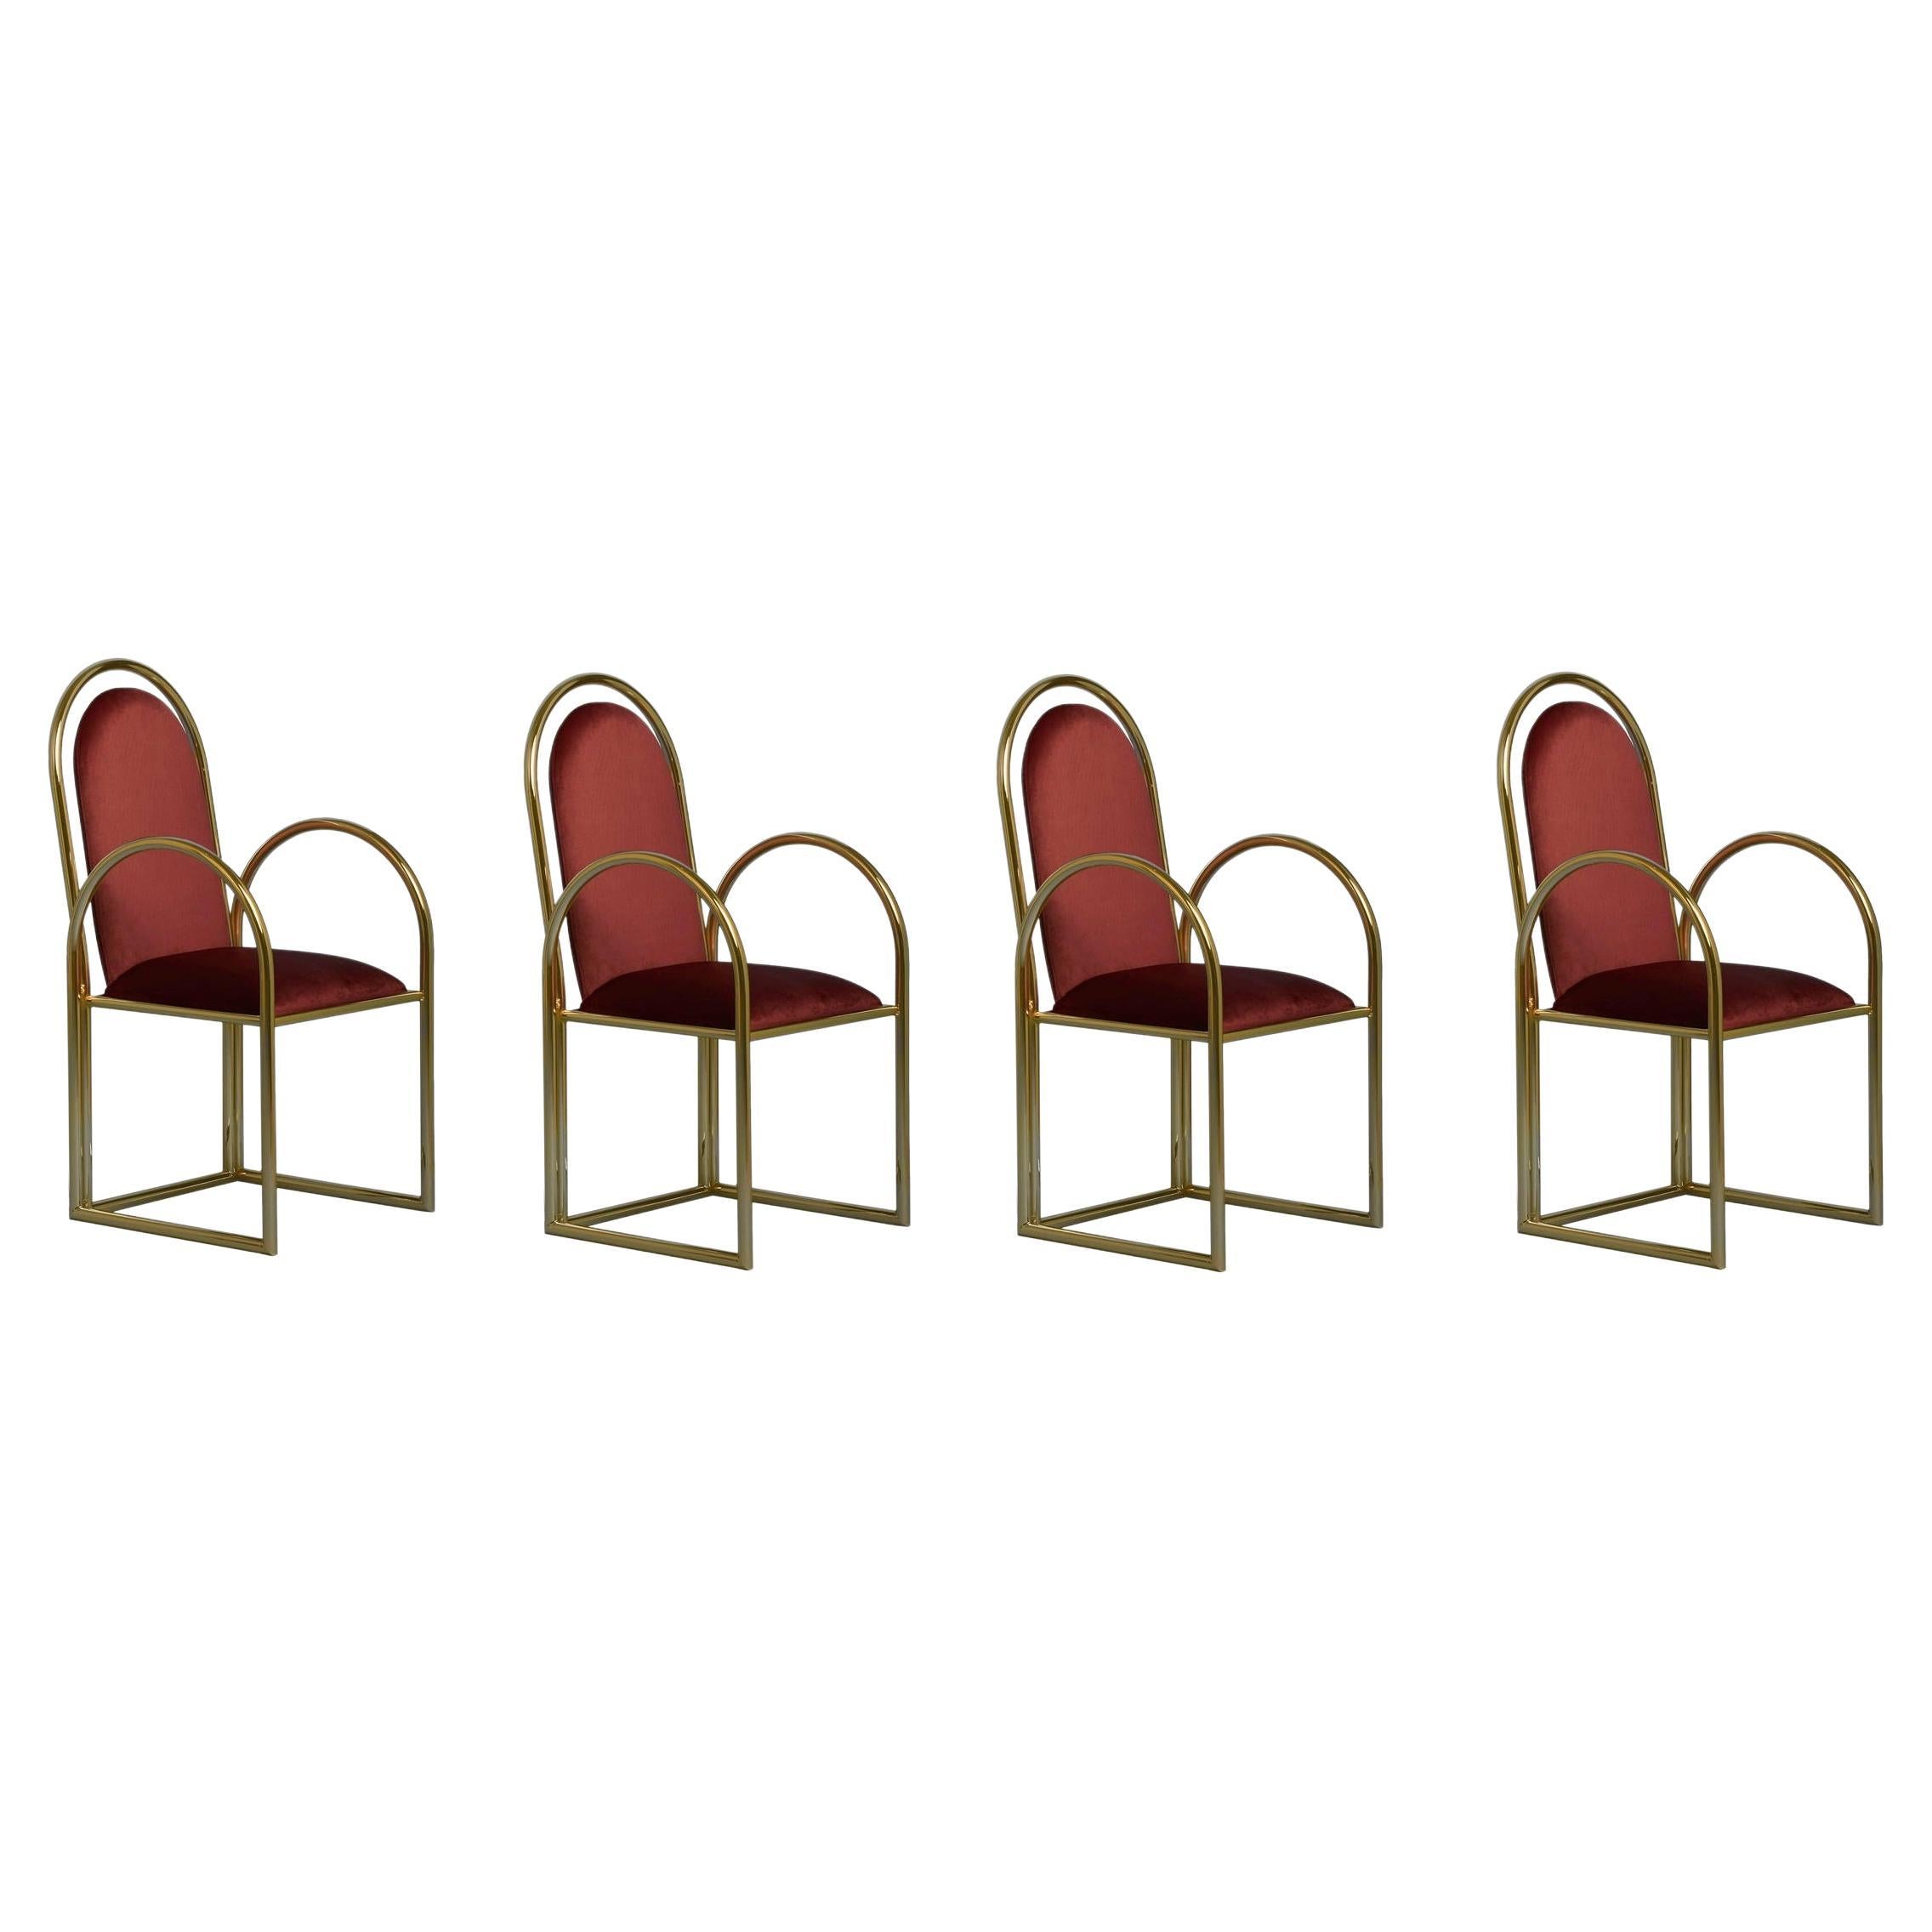 Set of 4 Arco Chairs by Houtique